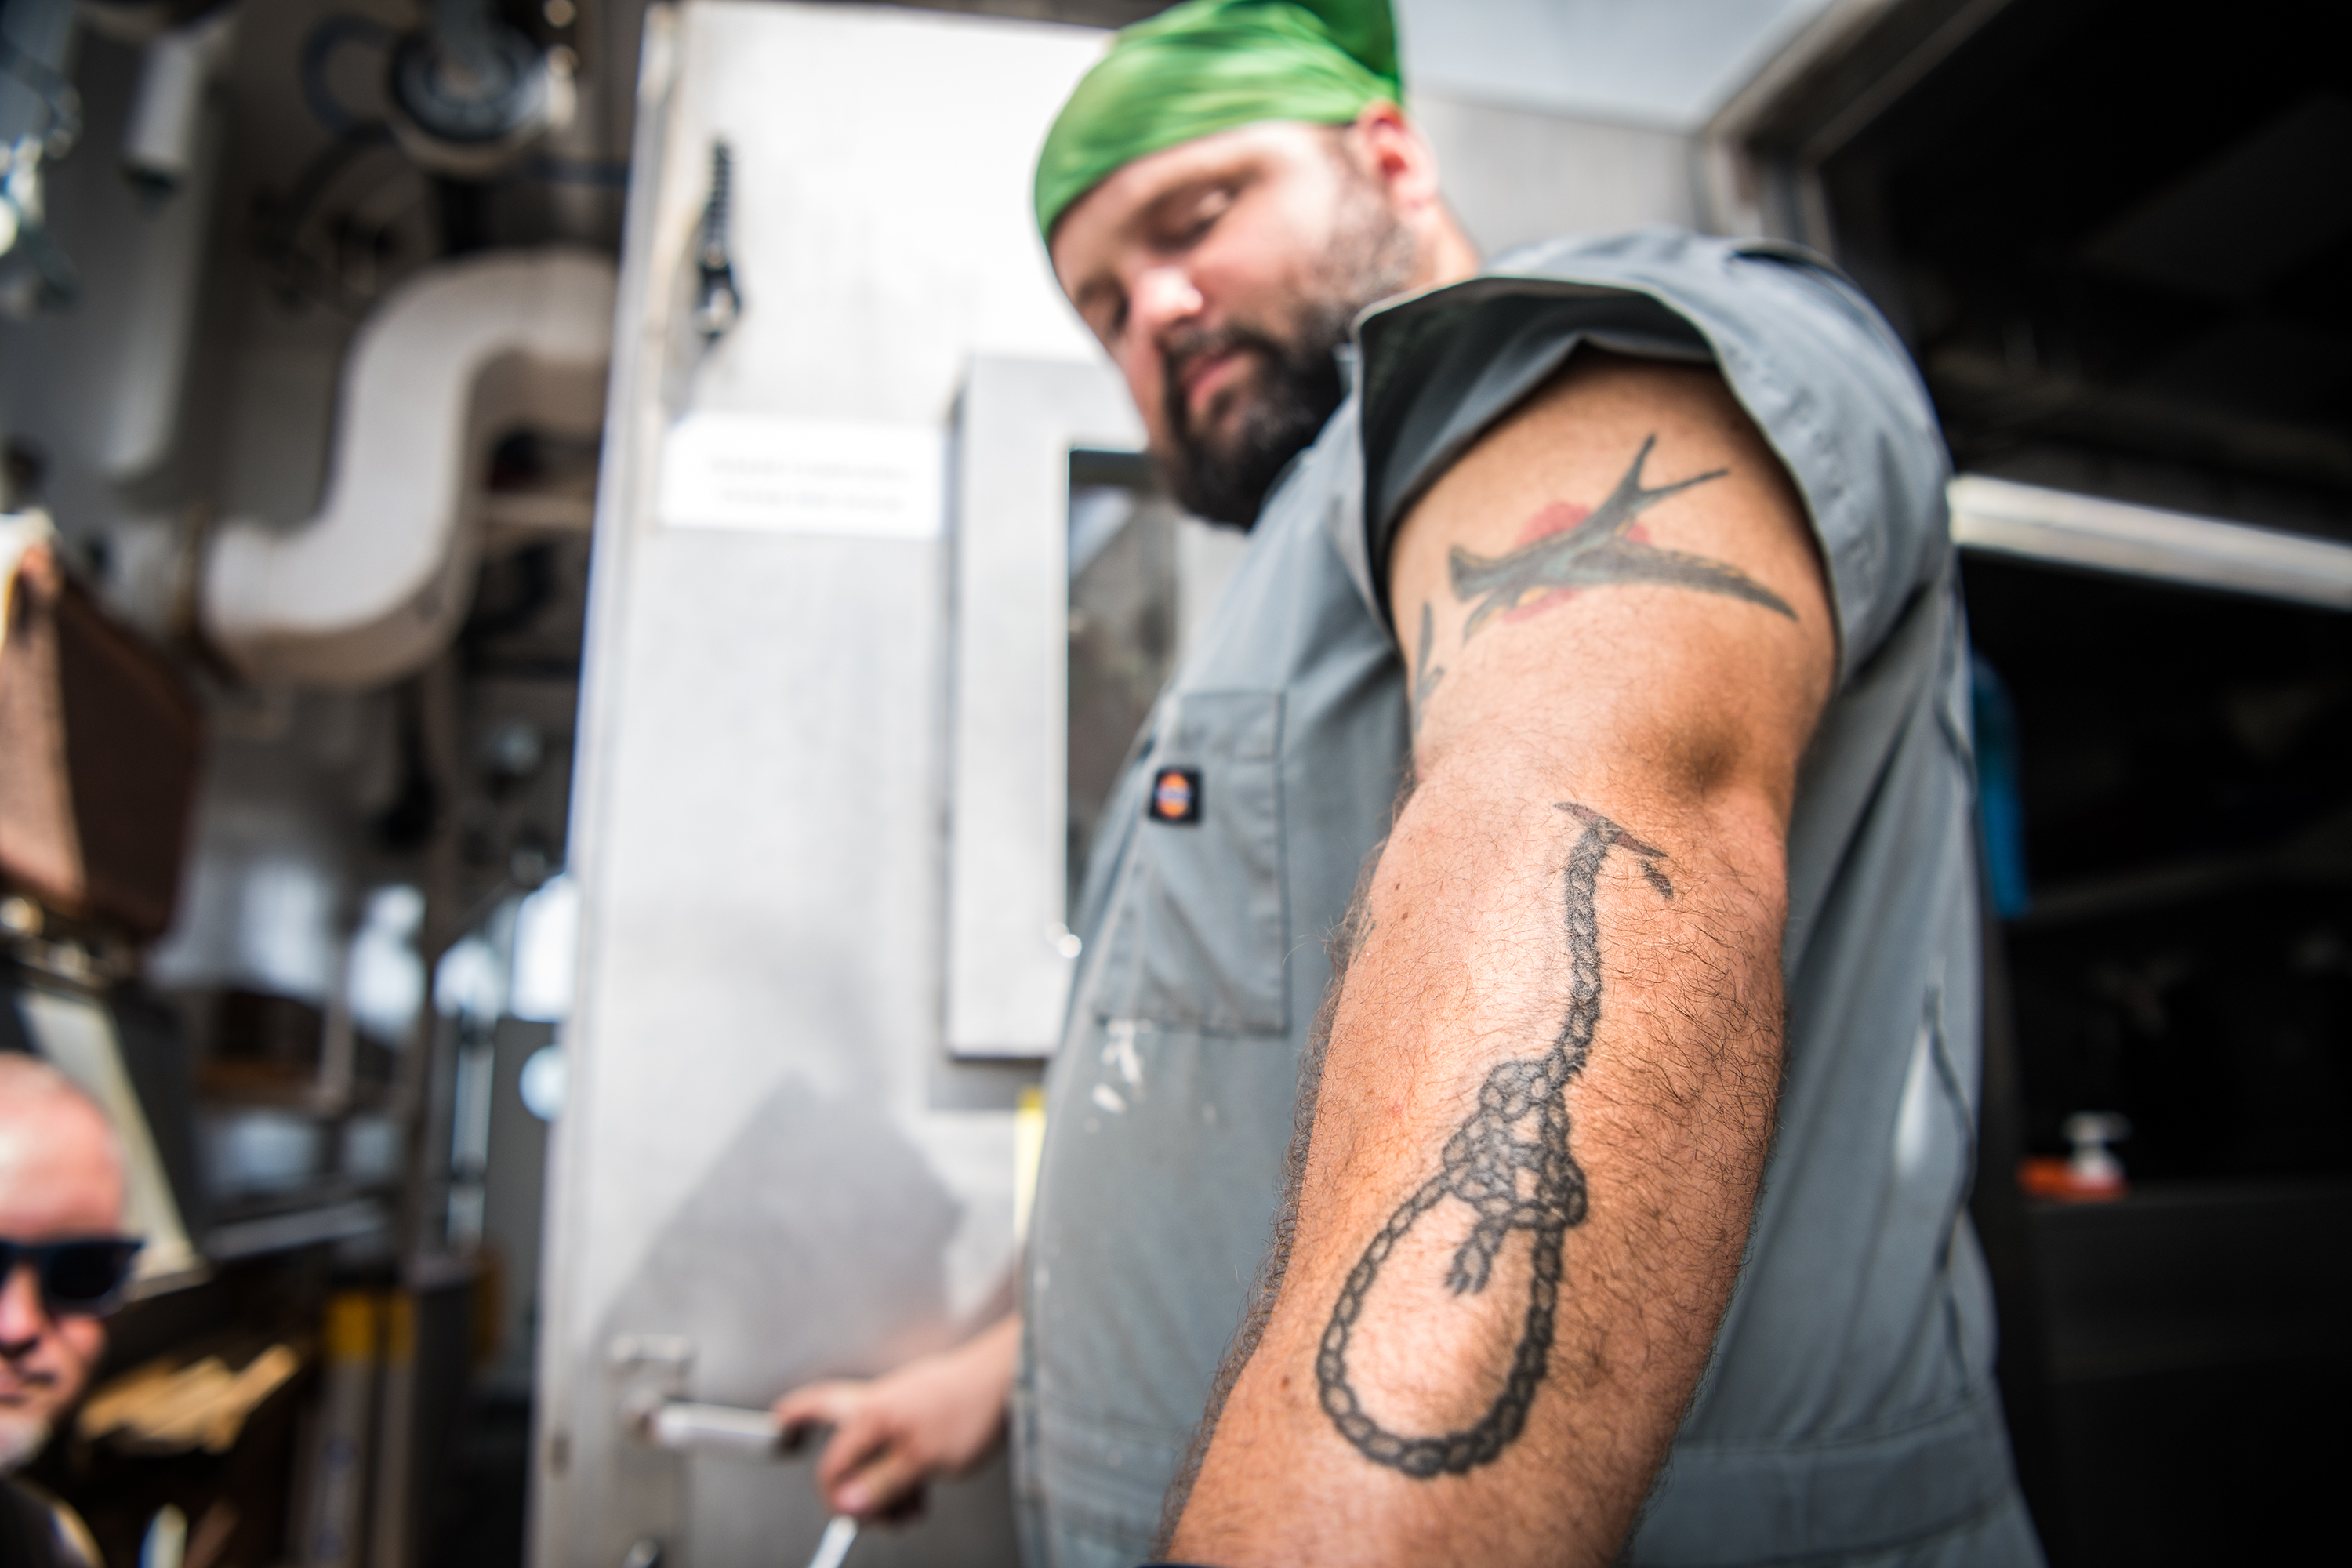 Pete’s bowline tattoo on his lower left arm represents his work as a bosun. It features a knot that is commonly used by seamen because of its strength.